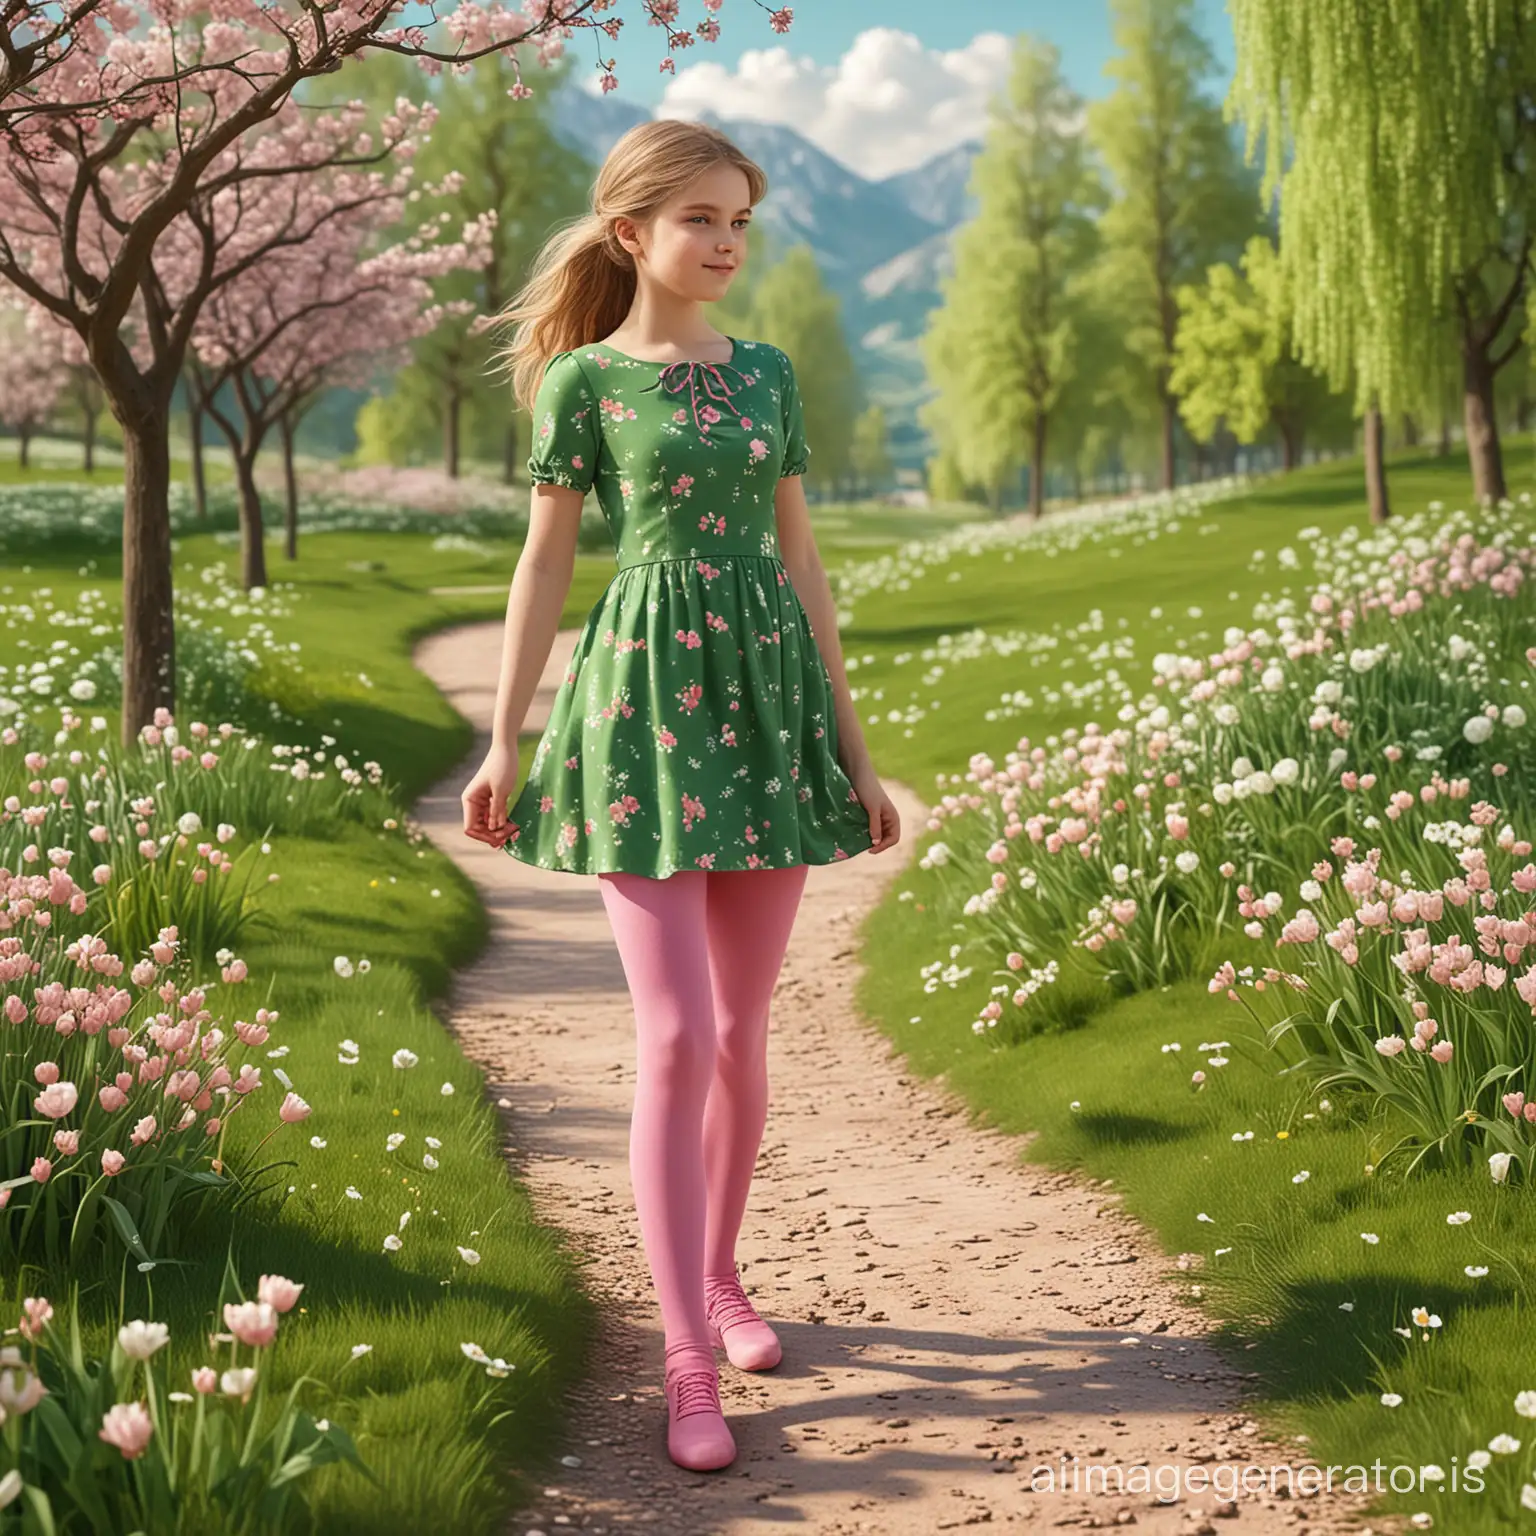 Enchanting-Spring-Landscape-with-Girl-in-Green-Dress-and-Pink-Tights